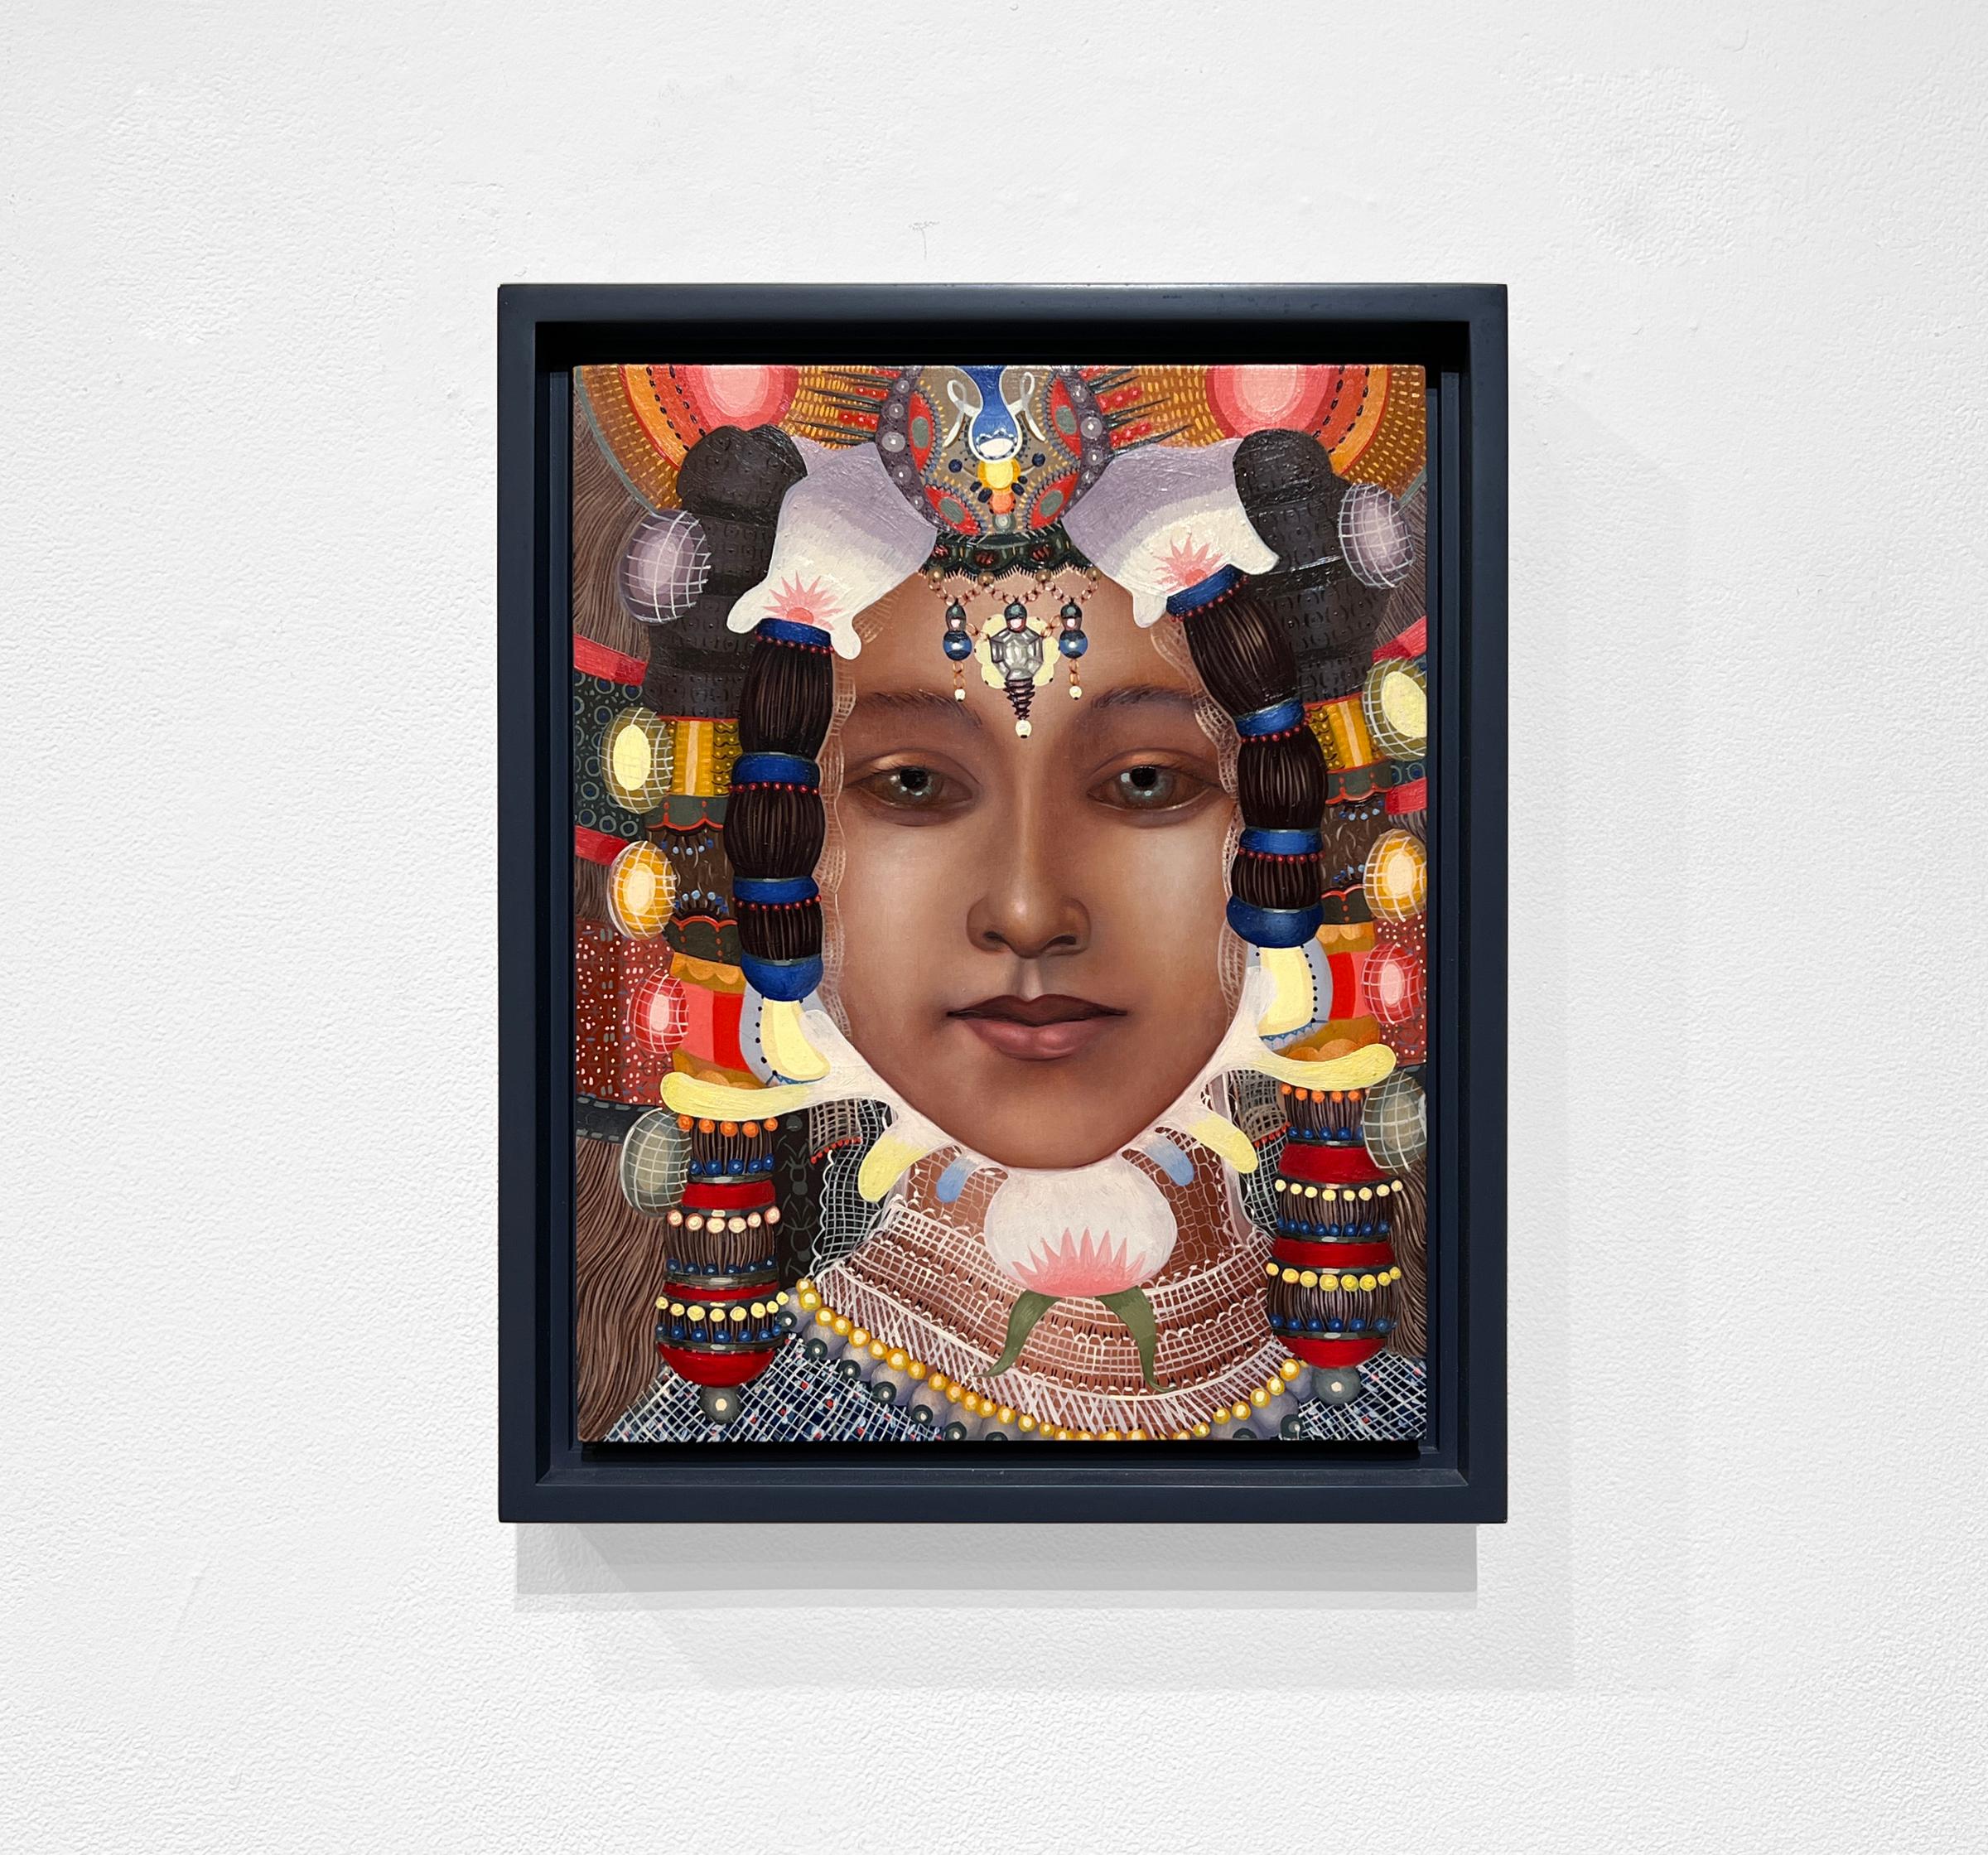 WOMAN #18 - Contemporary Realism / Female Portrait / Jeweled Headdress - Painting by Jacob Hicks